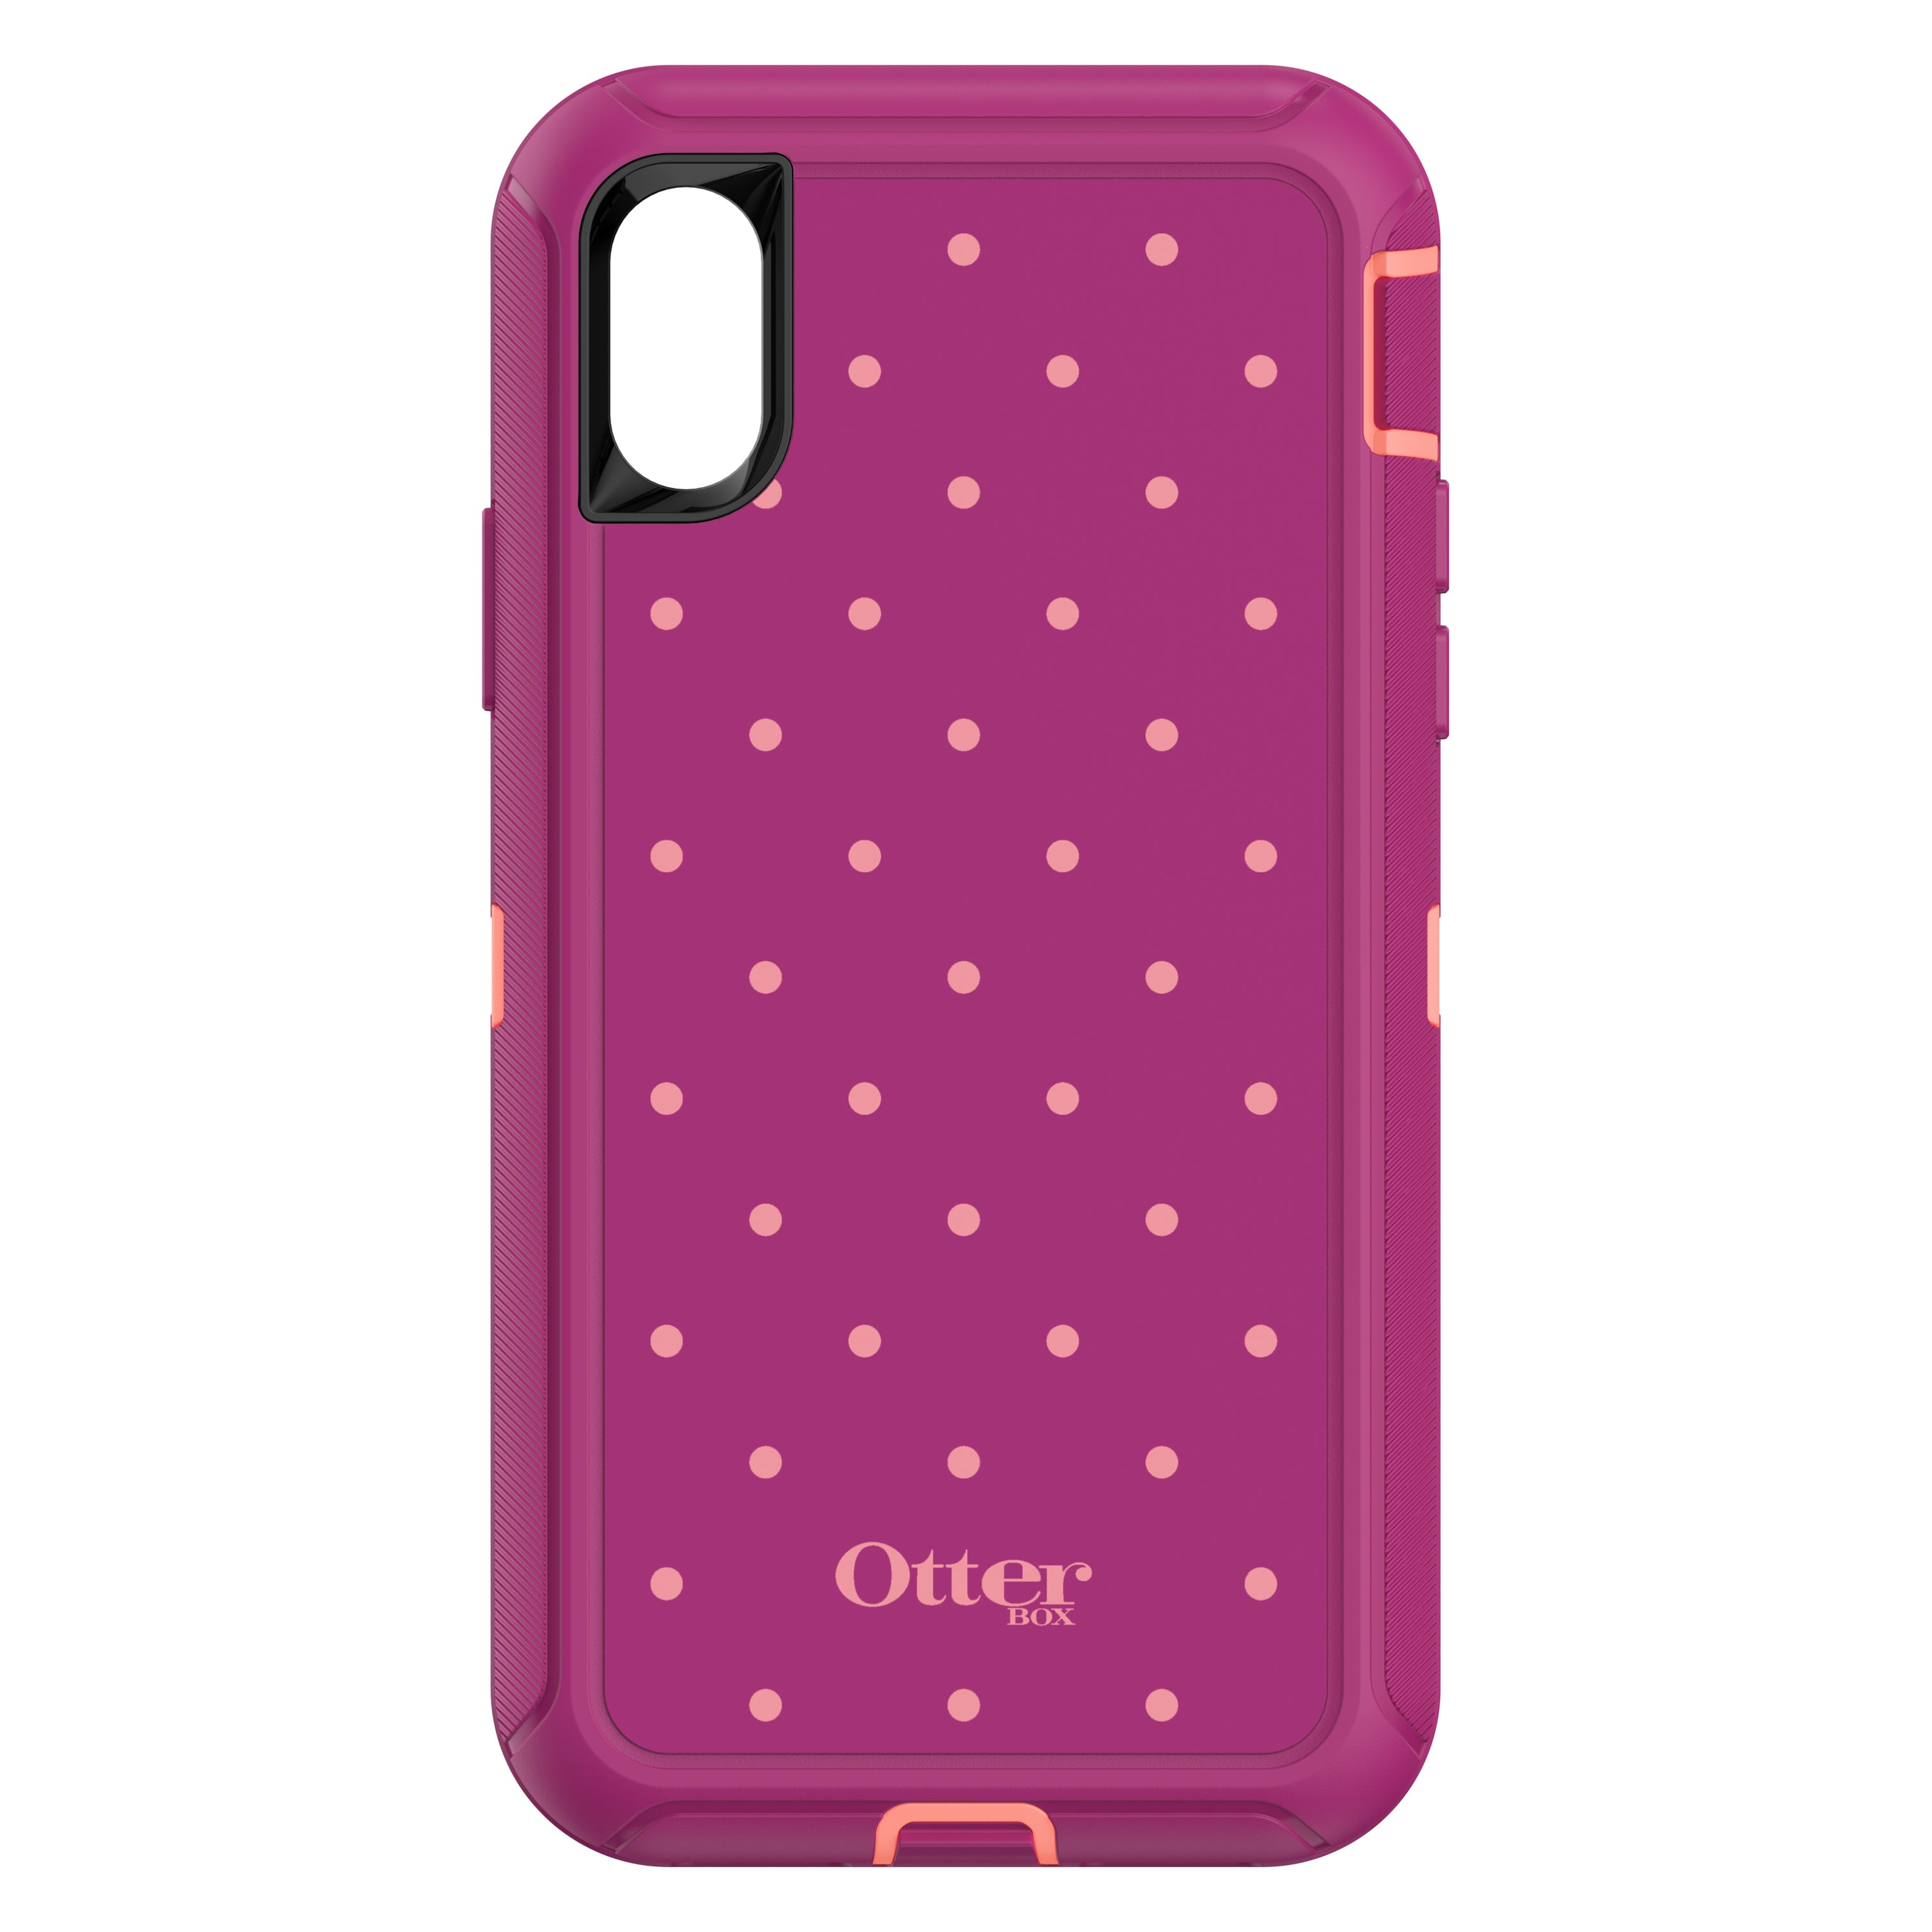 Otterbox Defender Series Case for iPhone X - Coral Dot